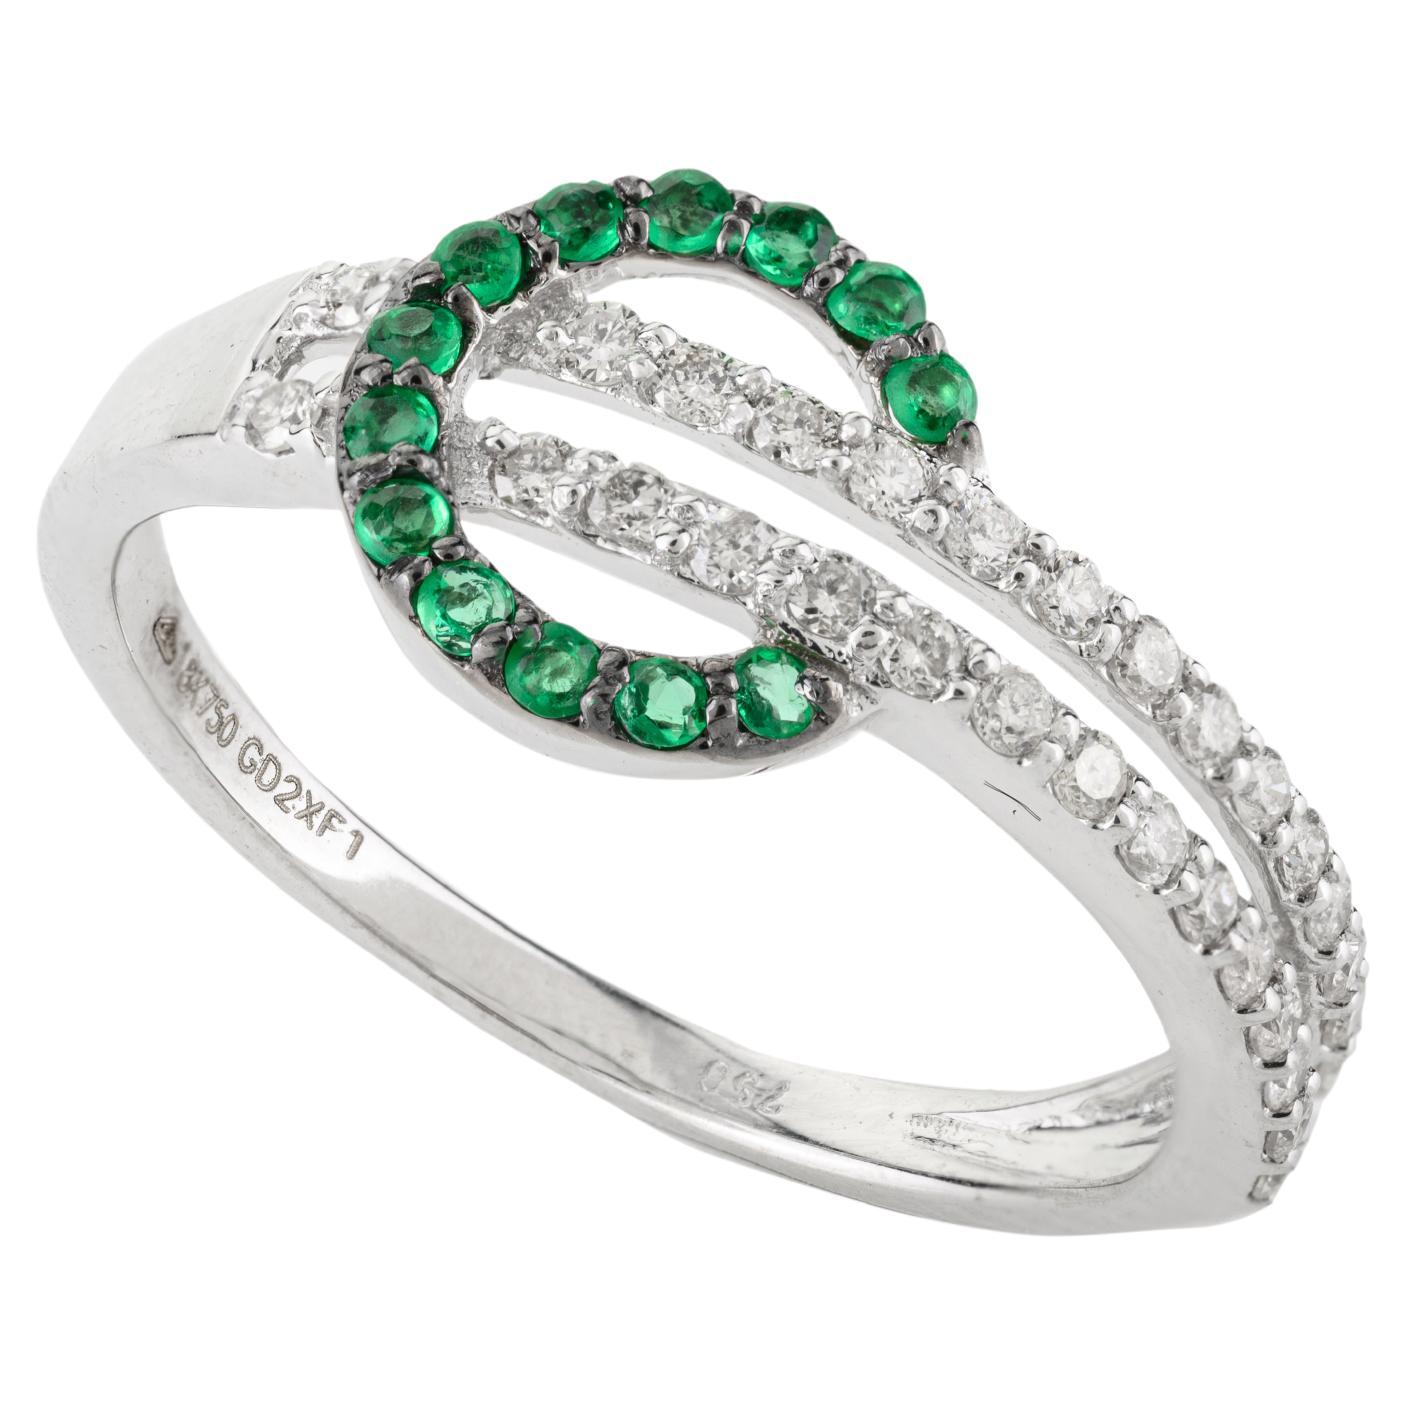 Unique Round Emerald Diamond Belt Buckle Ring in 18k Solid White Gold